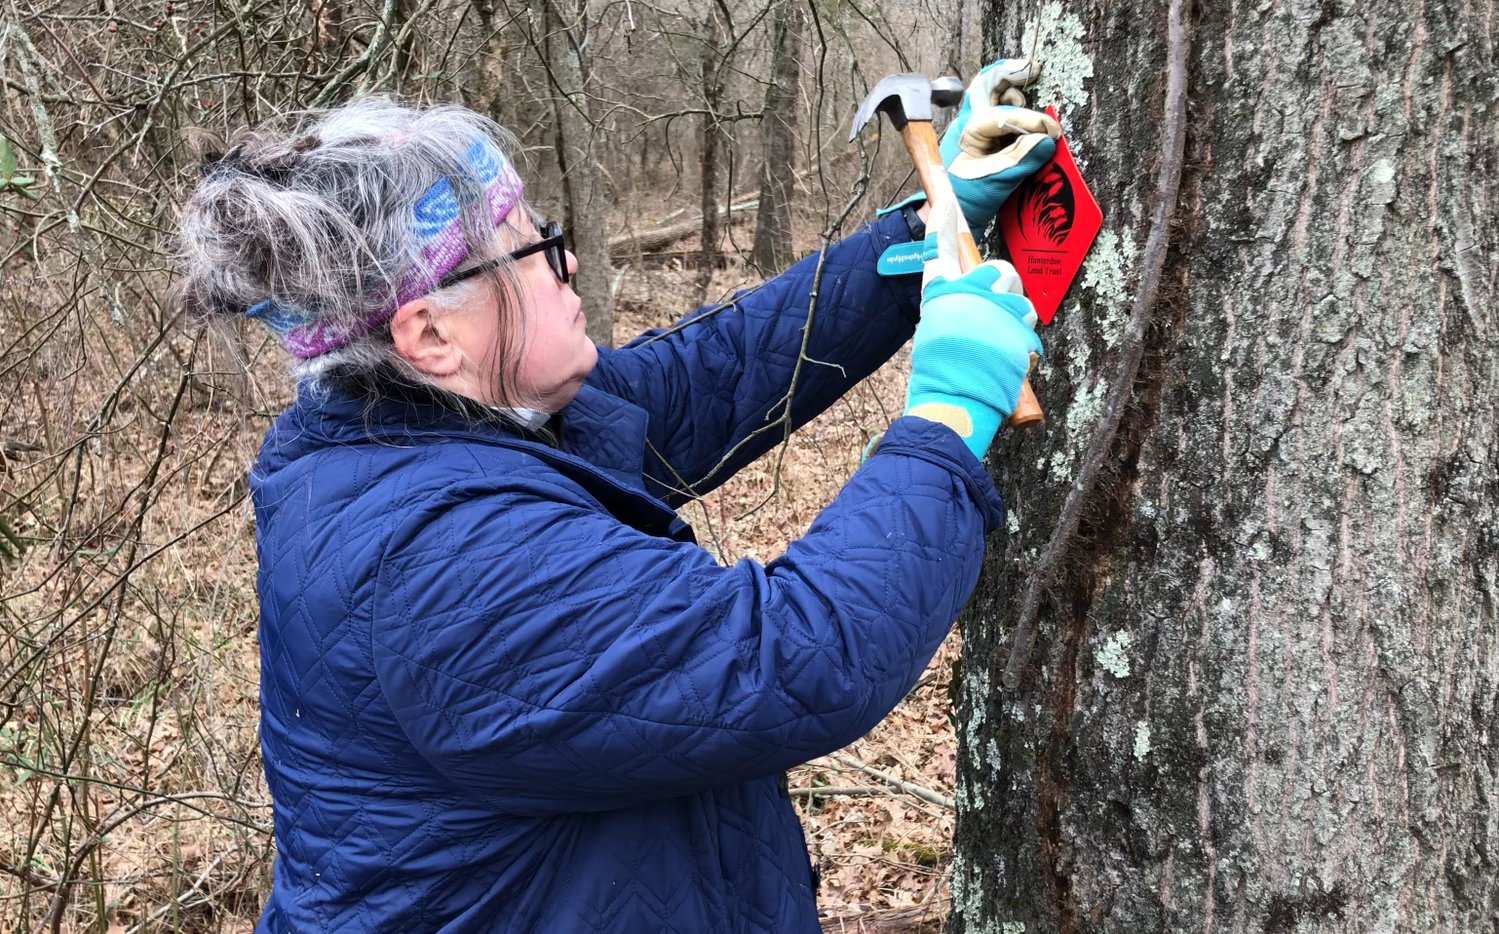 Debbie Kratzer nails a trail marker to a tree at Muddy Run Preserve. The trail is named in honor of her husband, Todd Kratzer, who passed away in 2012.